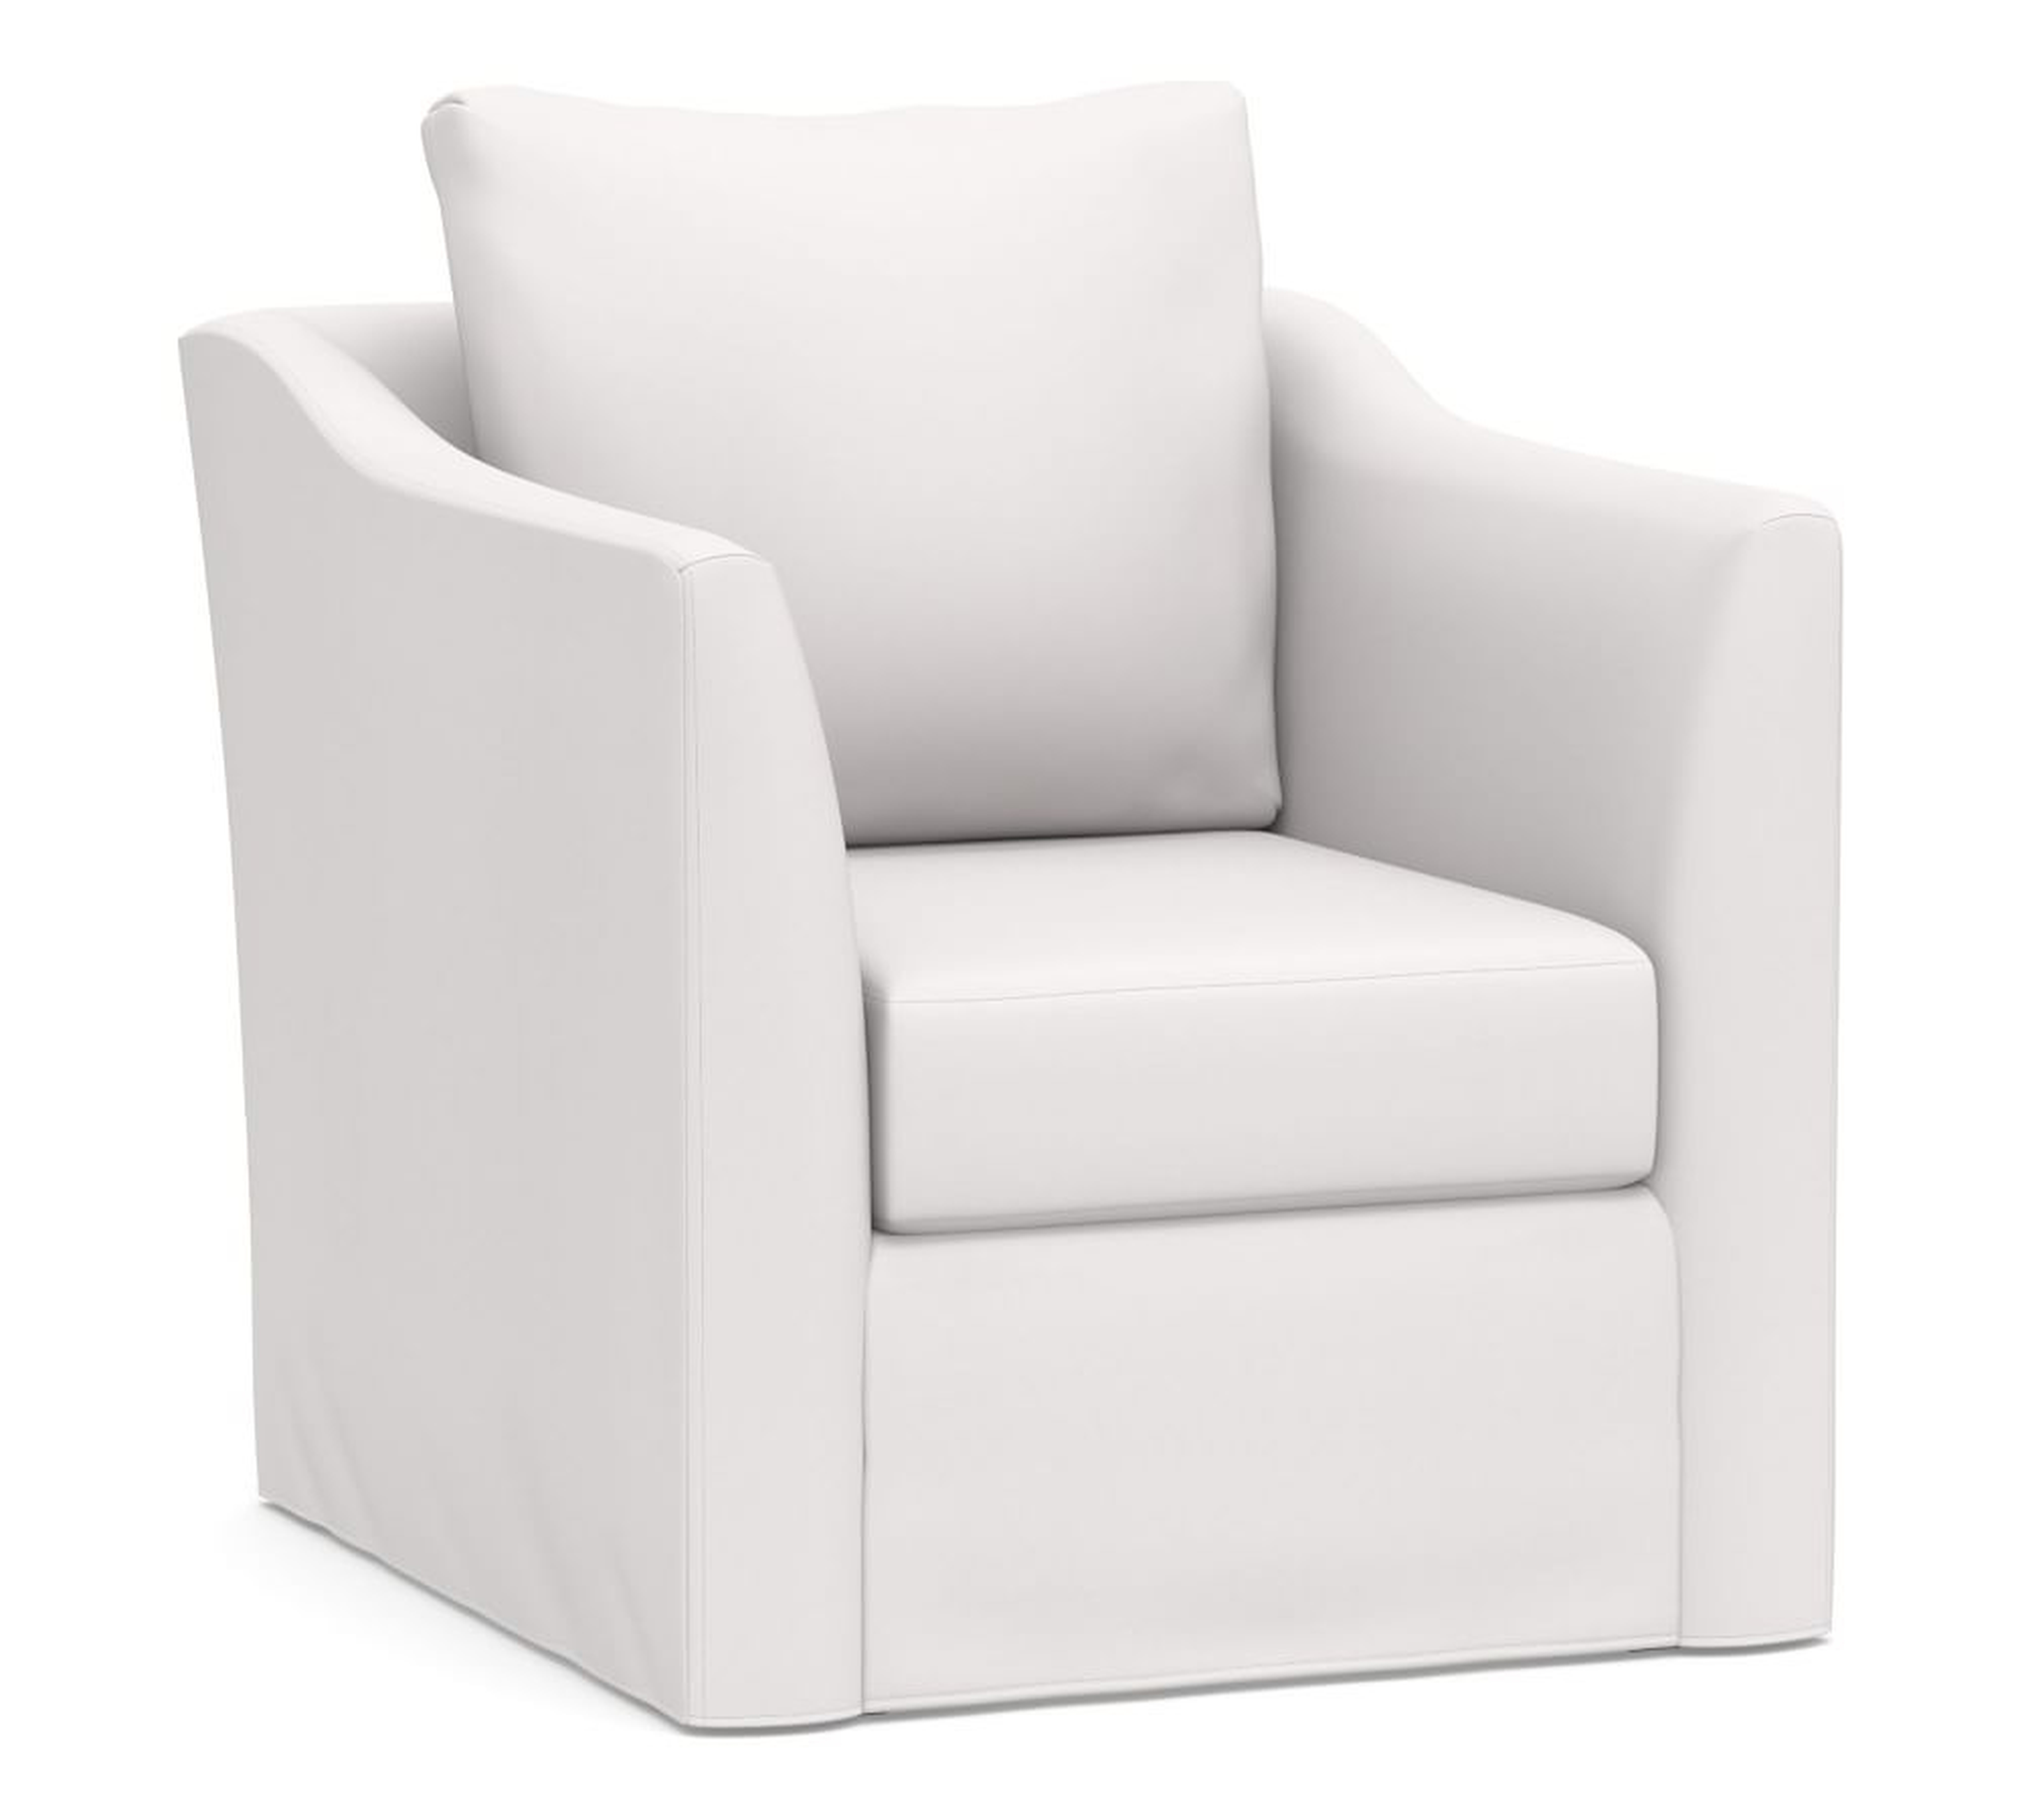 Celeste Slipcovered Armchair, Polyester Wrapped Cushions, Twill White - Pottery Barn